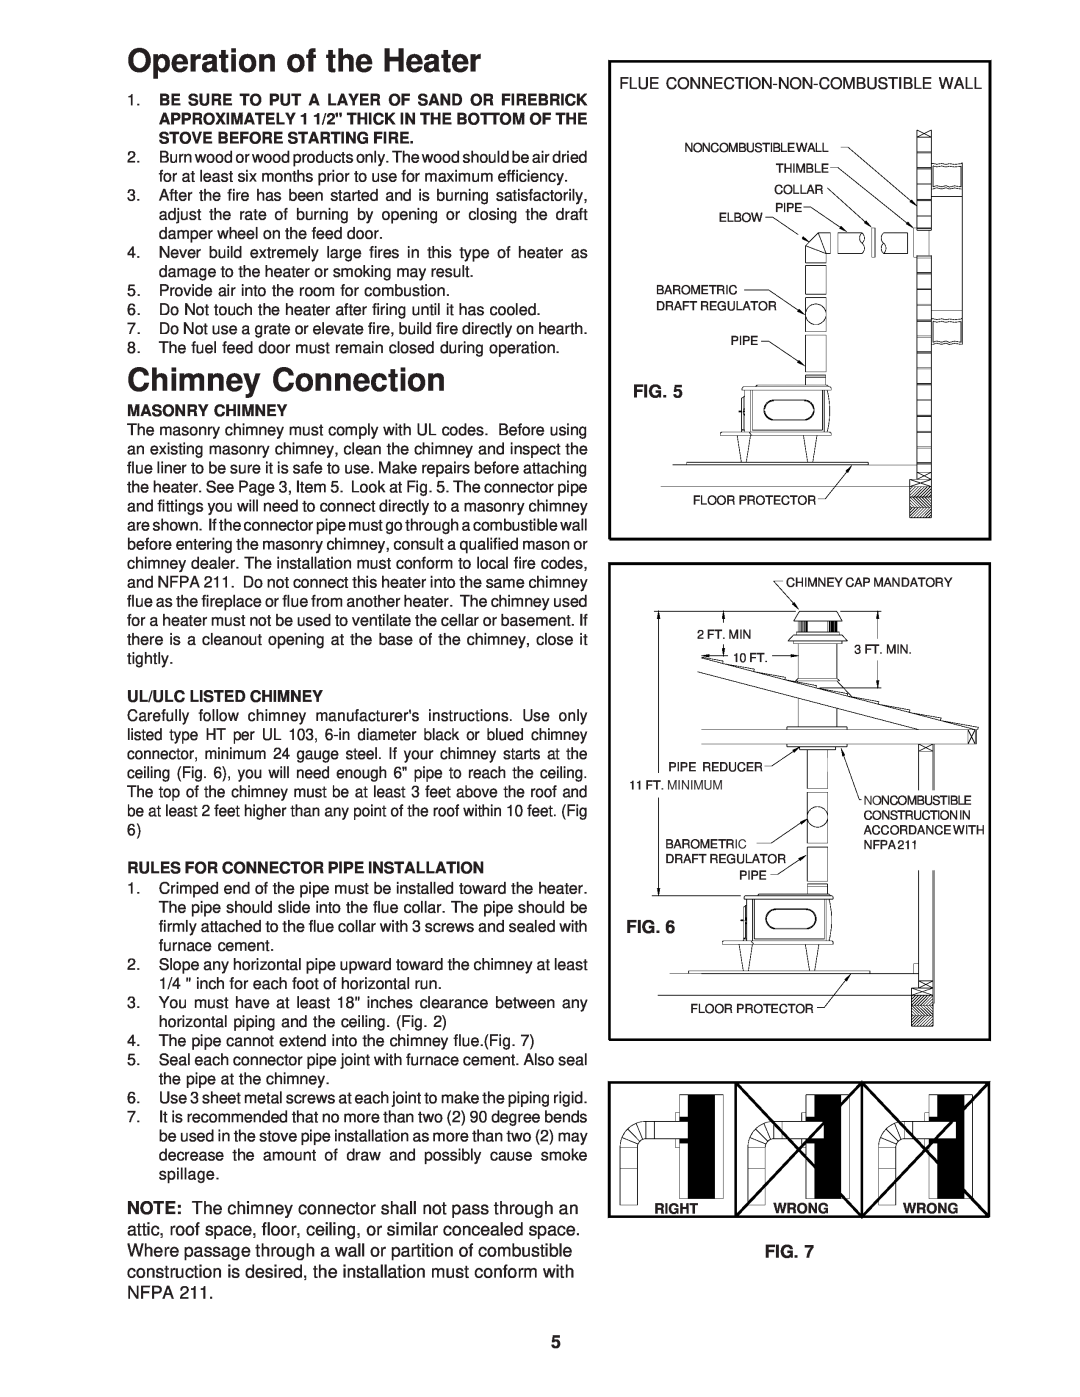 United States Stove 1261 Operation of the Heater, Chimney Connection, Be Sure To Put A Layer Of Sand Or Firebrick 